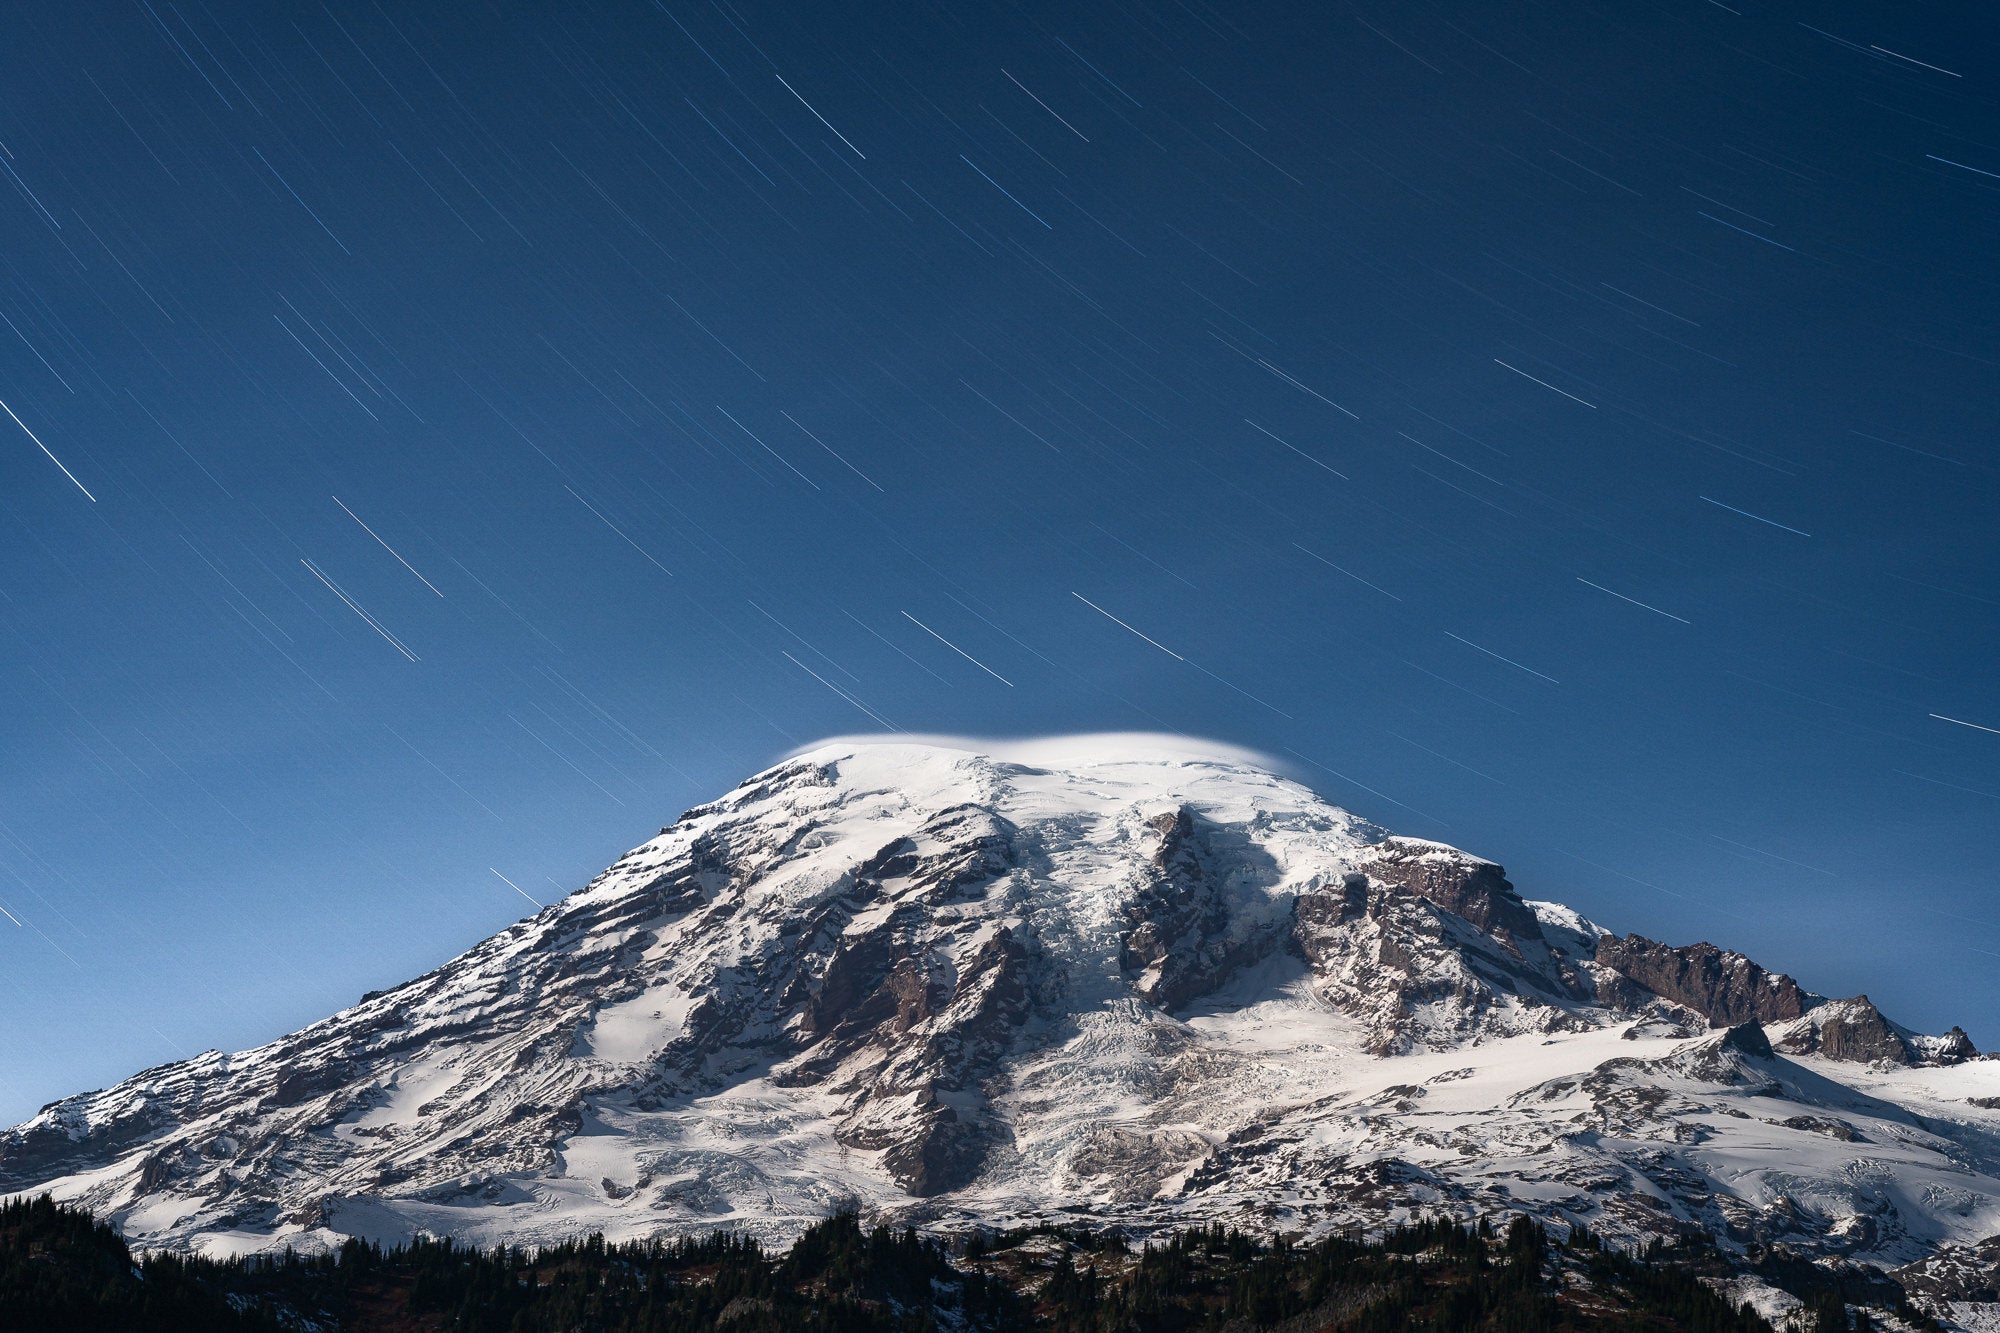 A long exposure image of the stars in motion above Mount Rainier, illuminated only by moonlight. Photo by Dylan McMains. Sony Alpha 7 III. Sony 24-105 f/4 G. 40-min, f/11, ISO 100